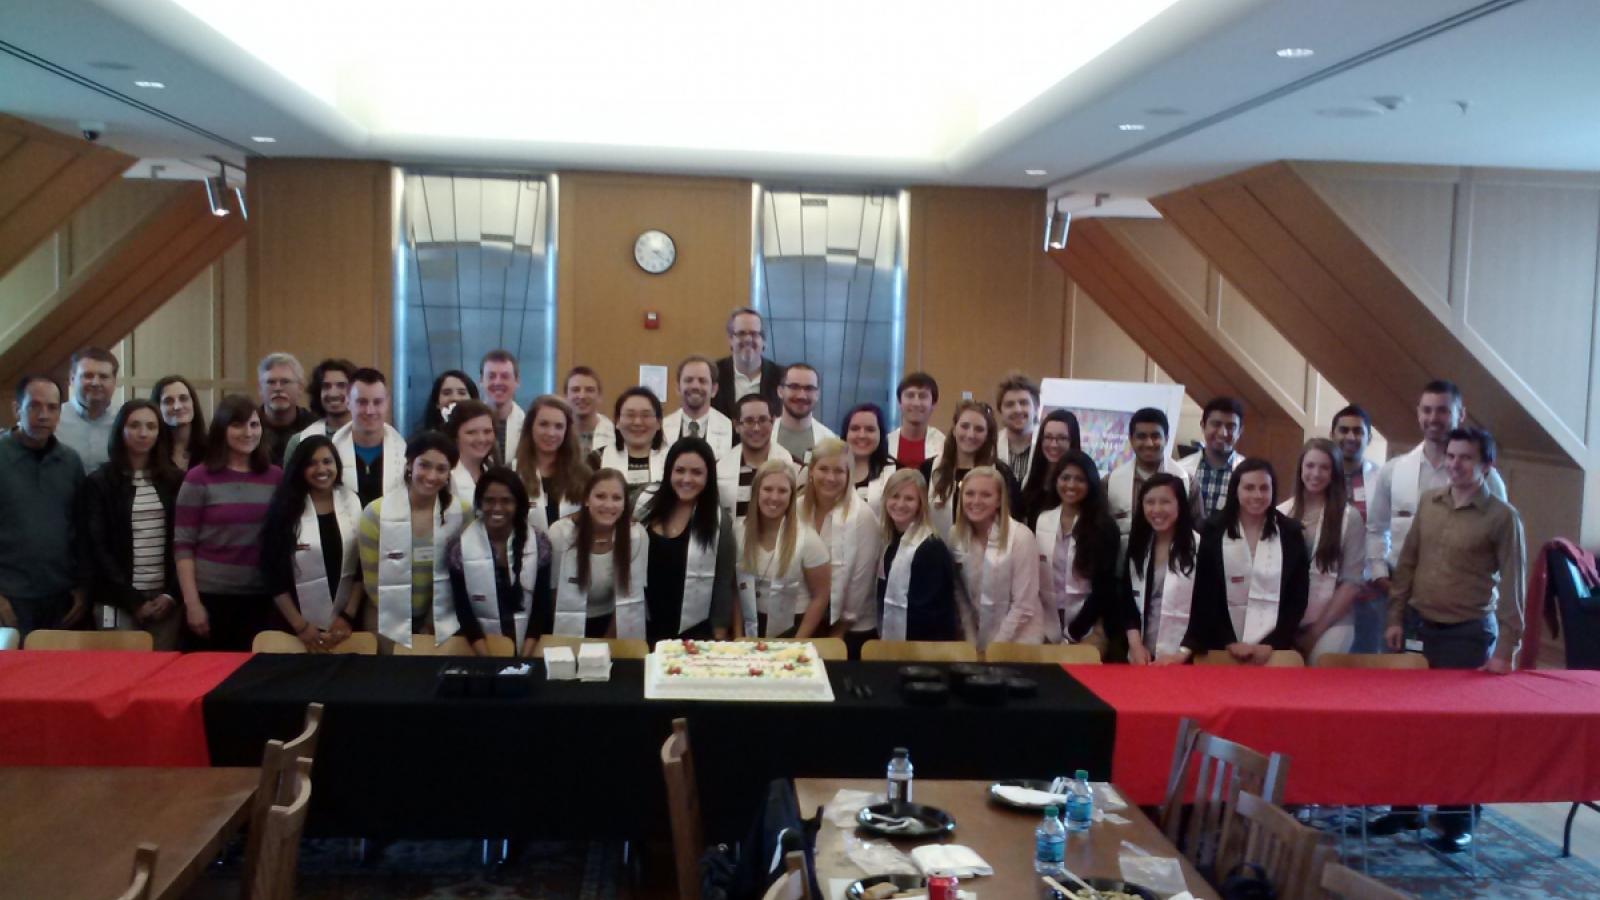 Neuroscience Class of 2014 and some key faculty and staff celebrate at the graduation reception.